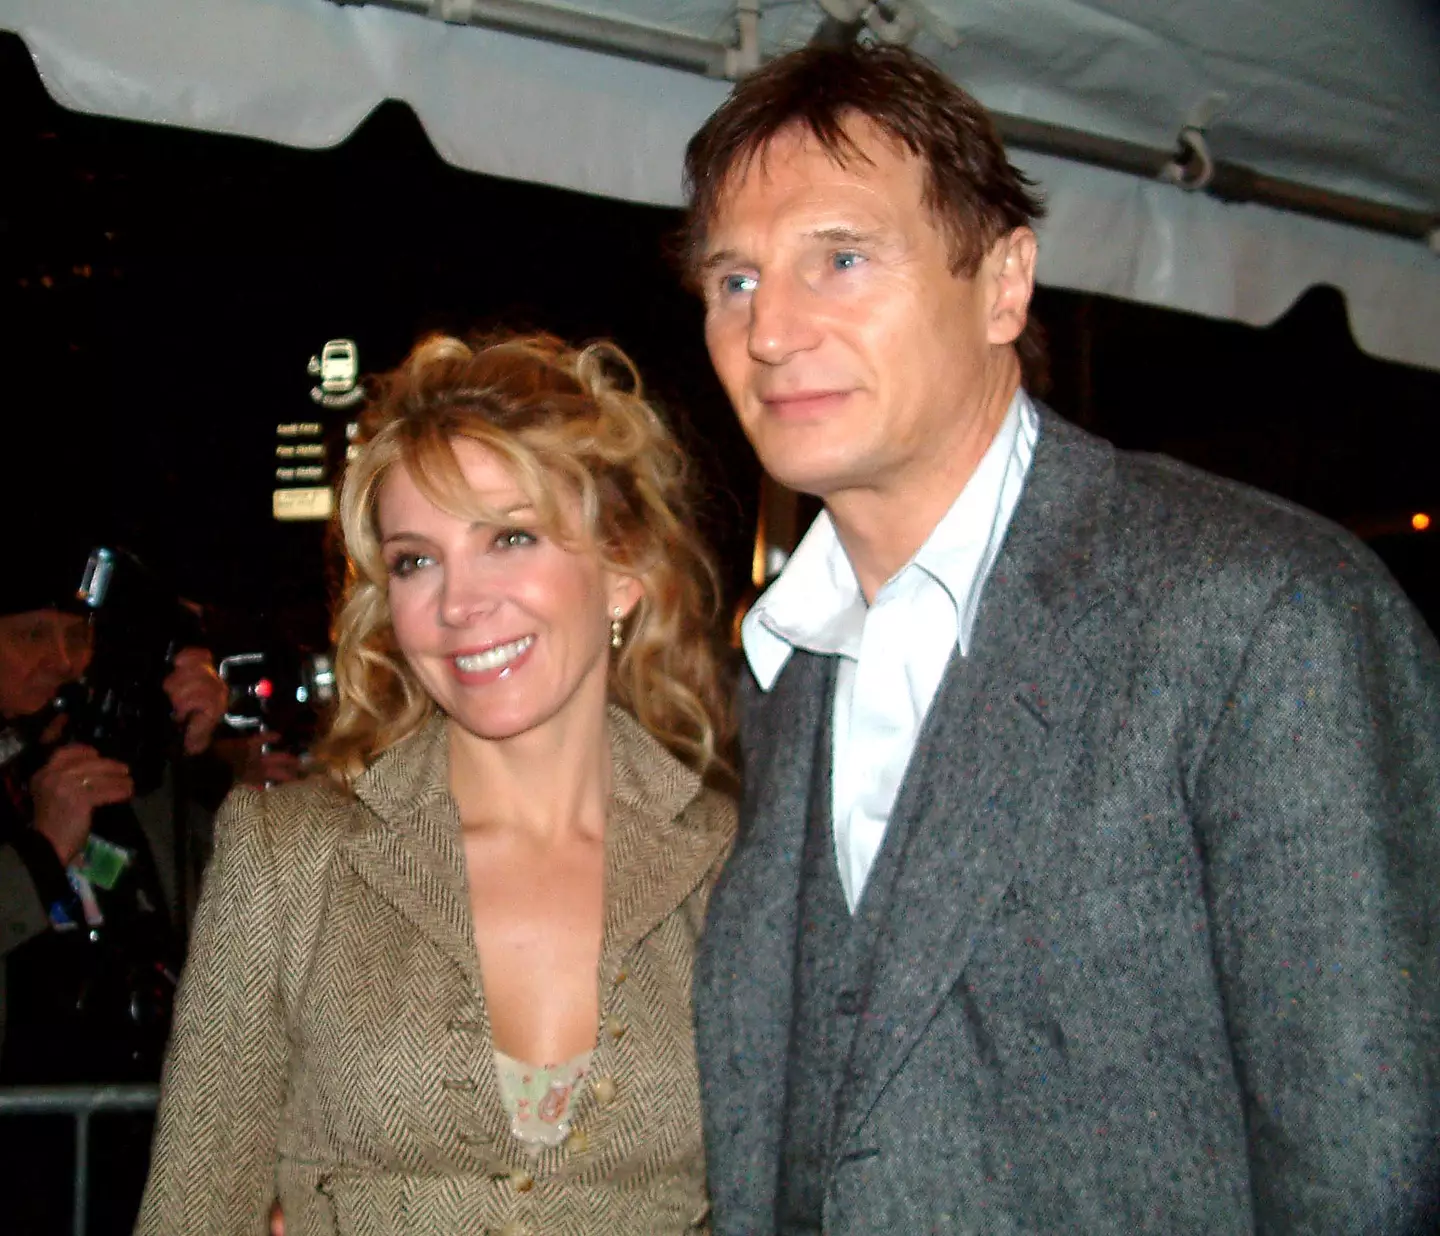 Liam Neeson has opened up about his late wife Natasha Richardson, revealing that he talks to her grave every day.